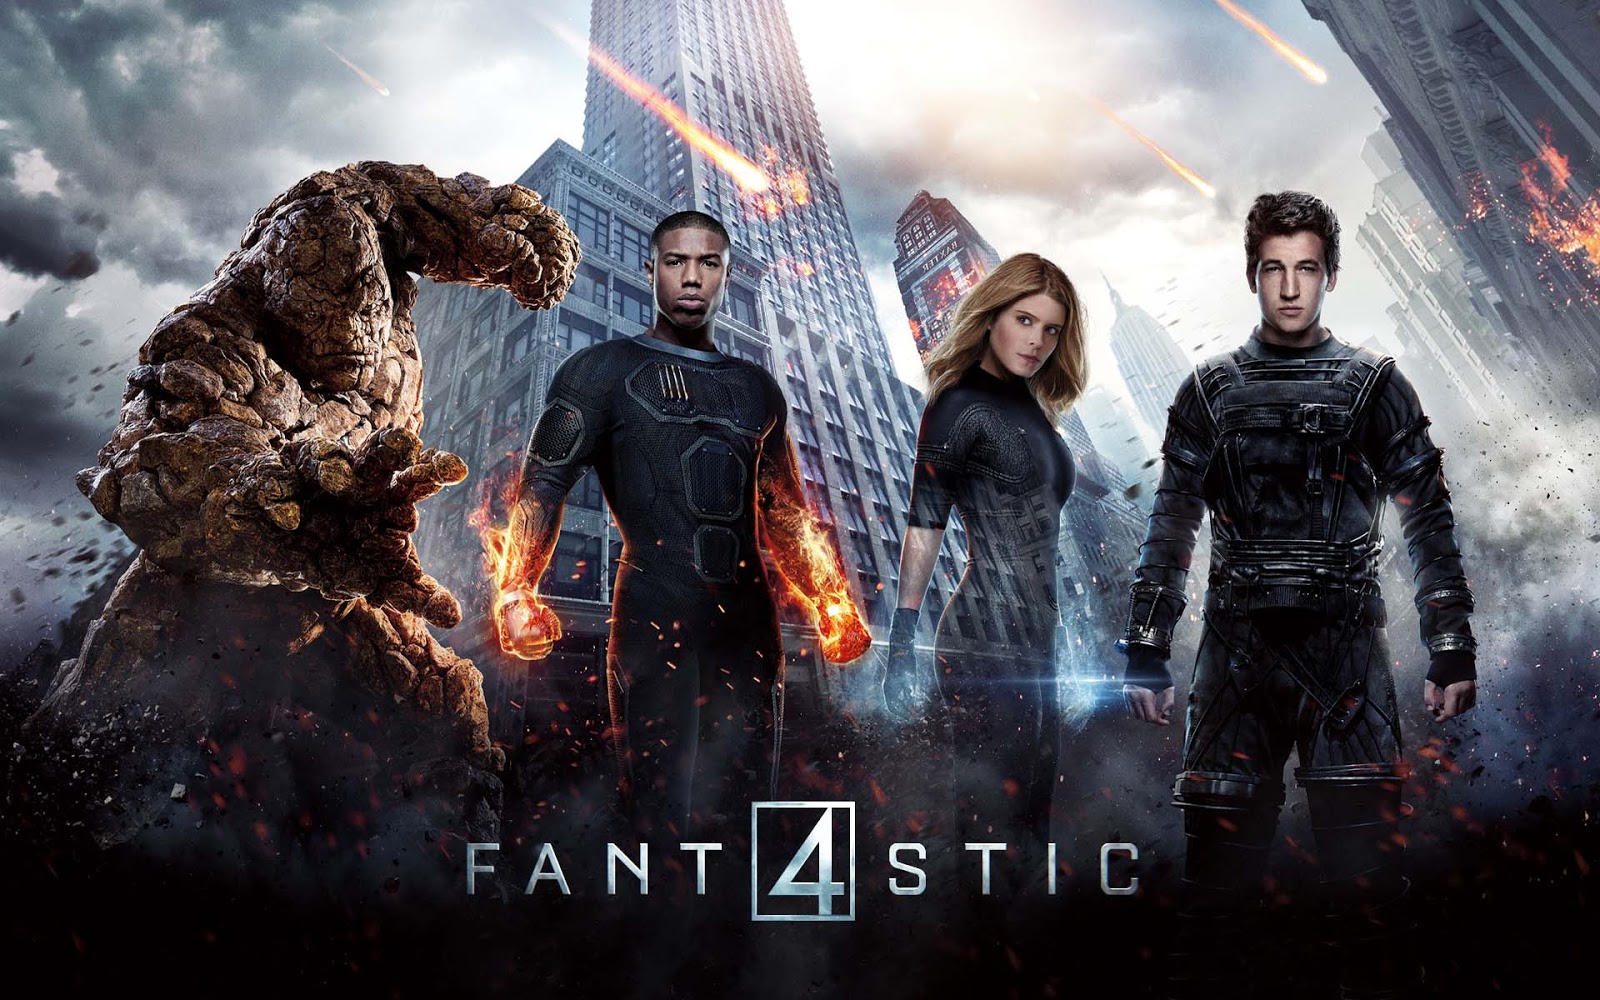 HD Movie Free Download: Fantastic Four (2015) New Hollywood Science